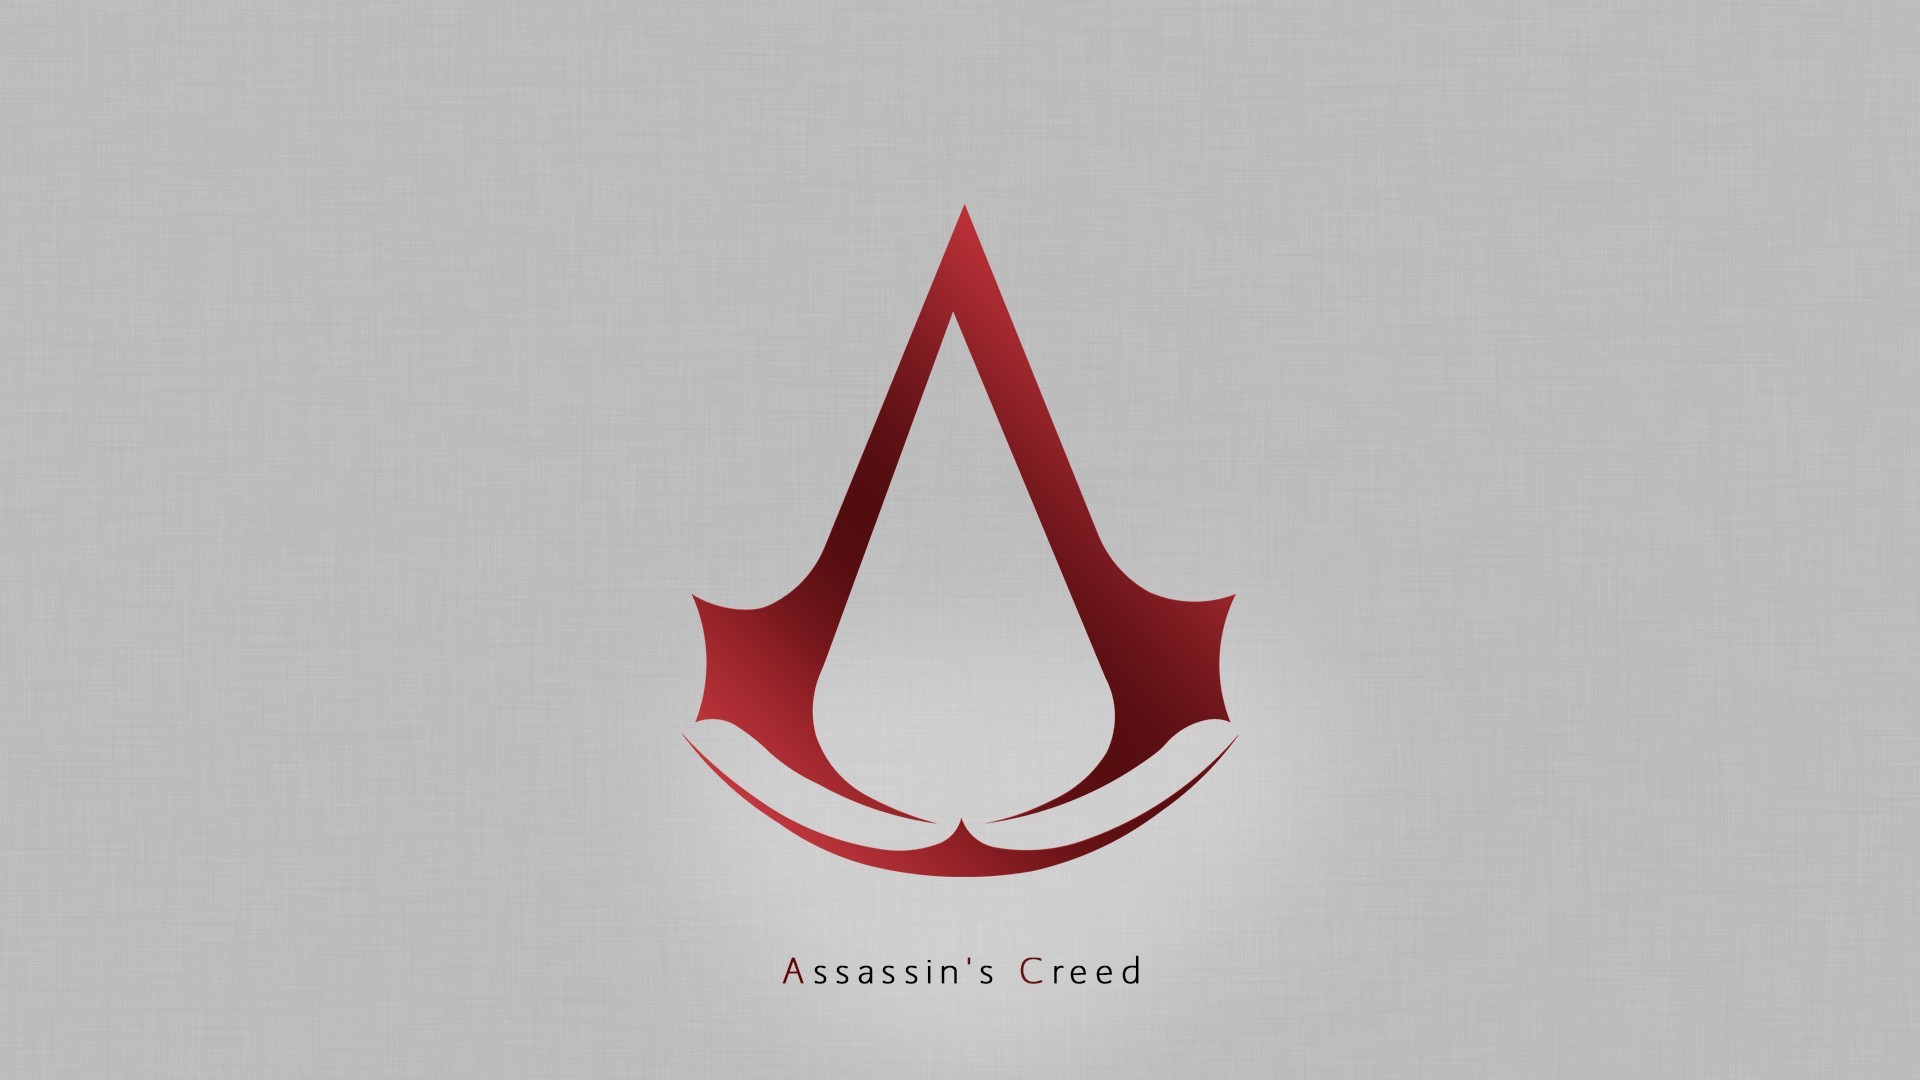 General 1920x1080 Assassin's Creed minimalism video games logo PC gaming simple background